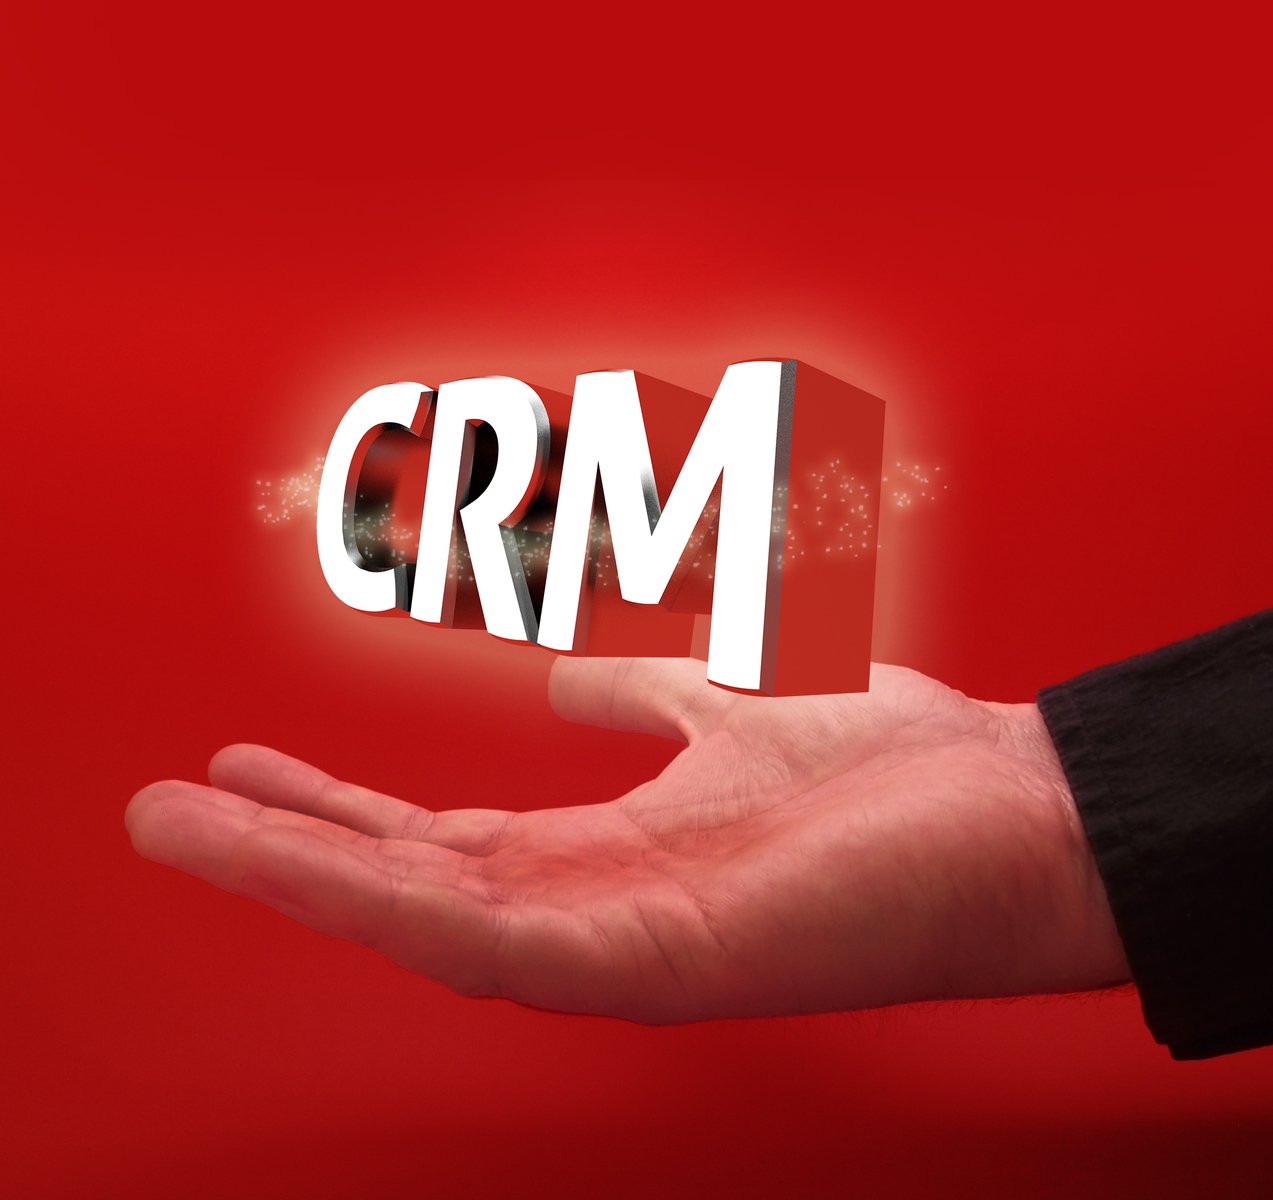 a person holding a word that reads crm in their hand